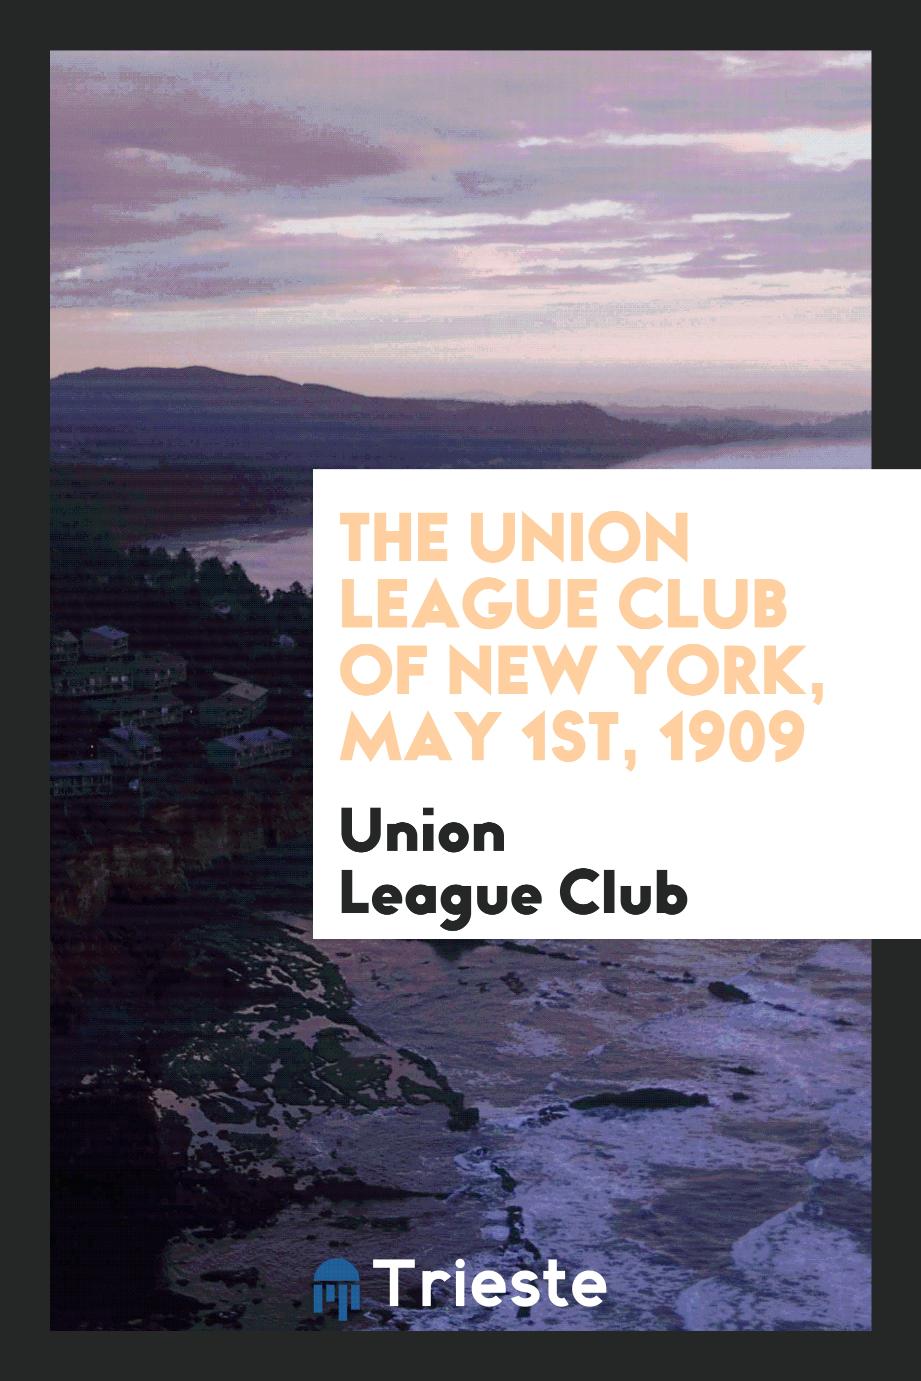 The Union League Club of New York, May 1st, 1909